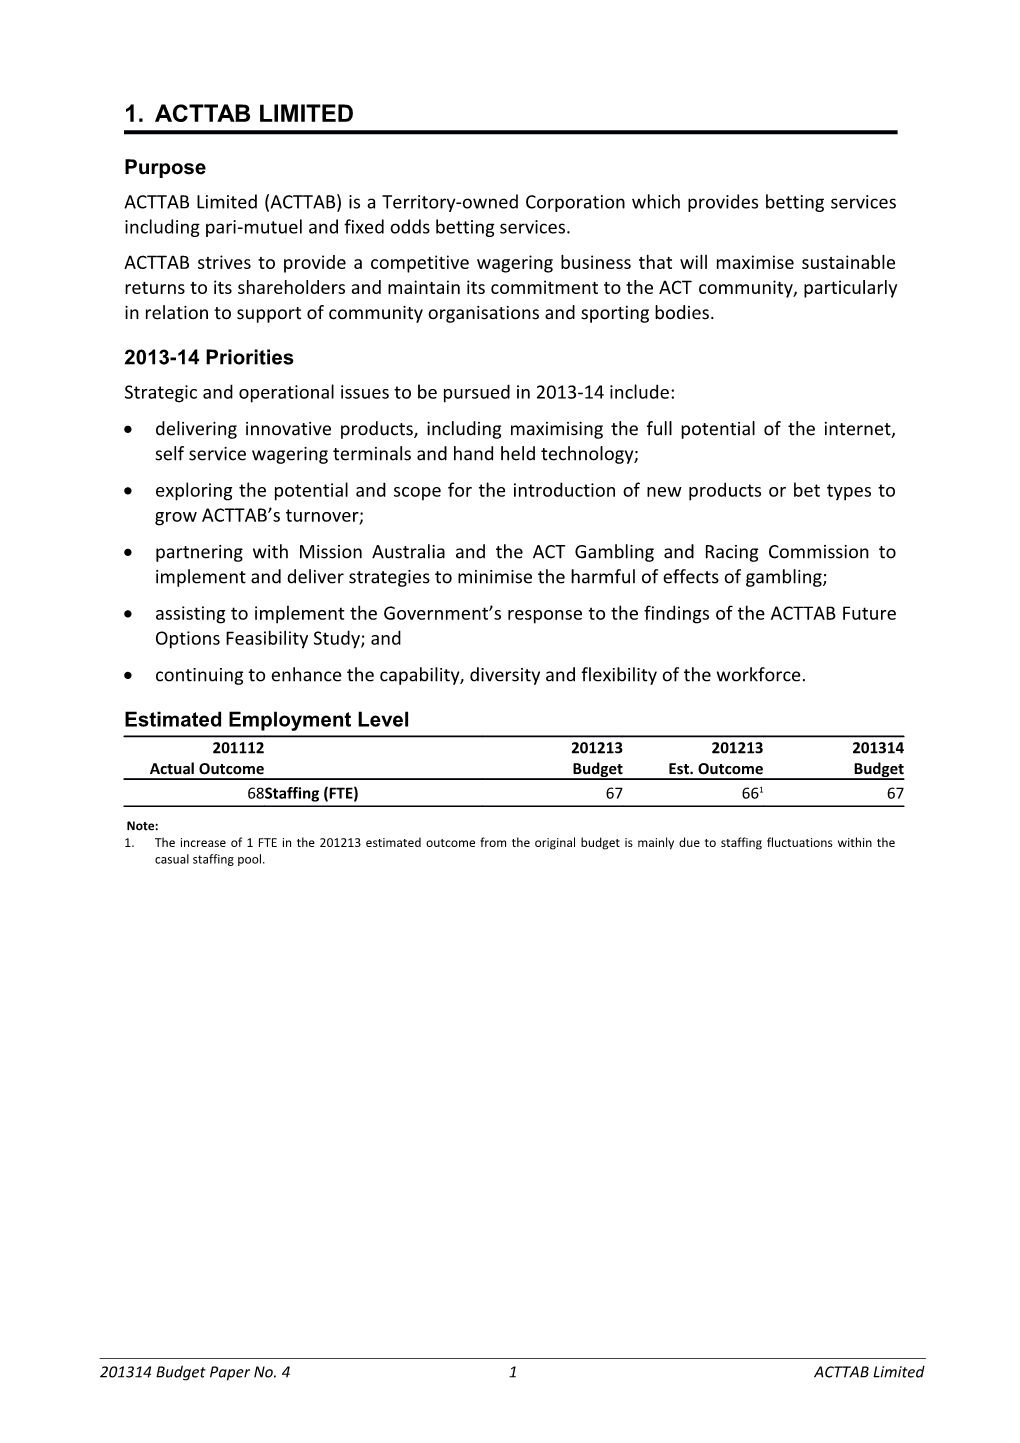 2013-14 Budget Paper 4: ACTTAB Limited